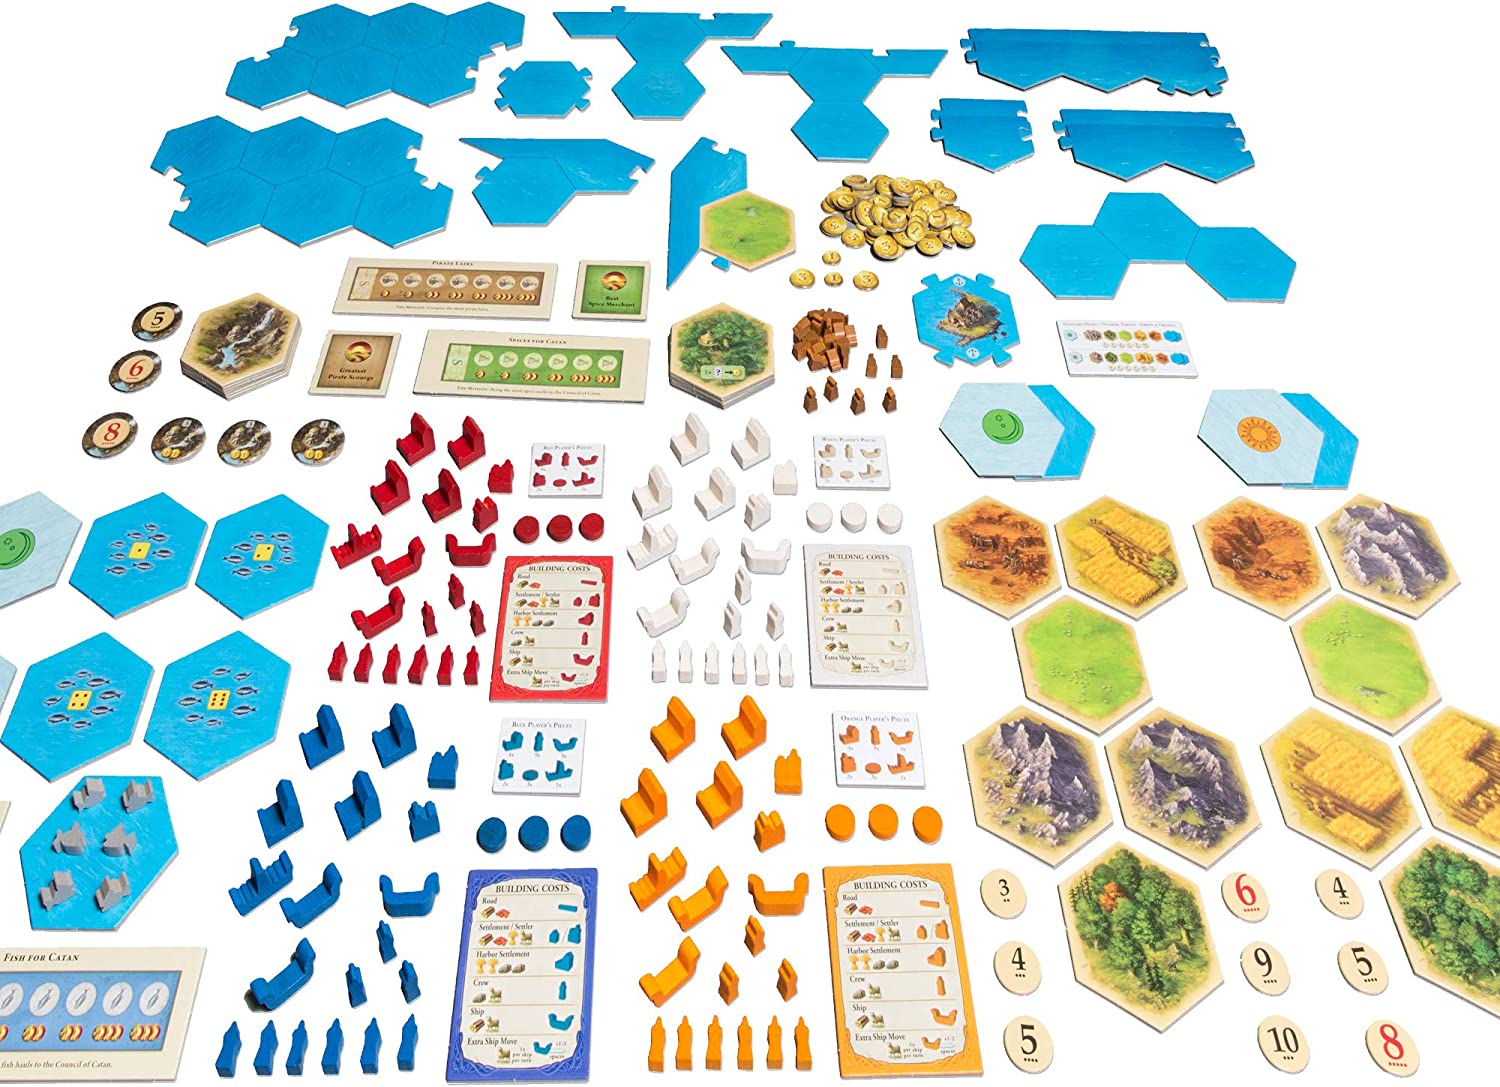 Catan Expansion: Seafarers (Requires Base Game)